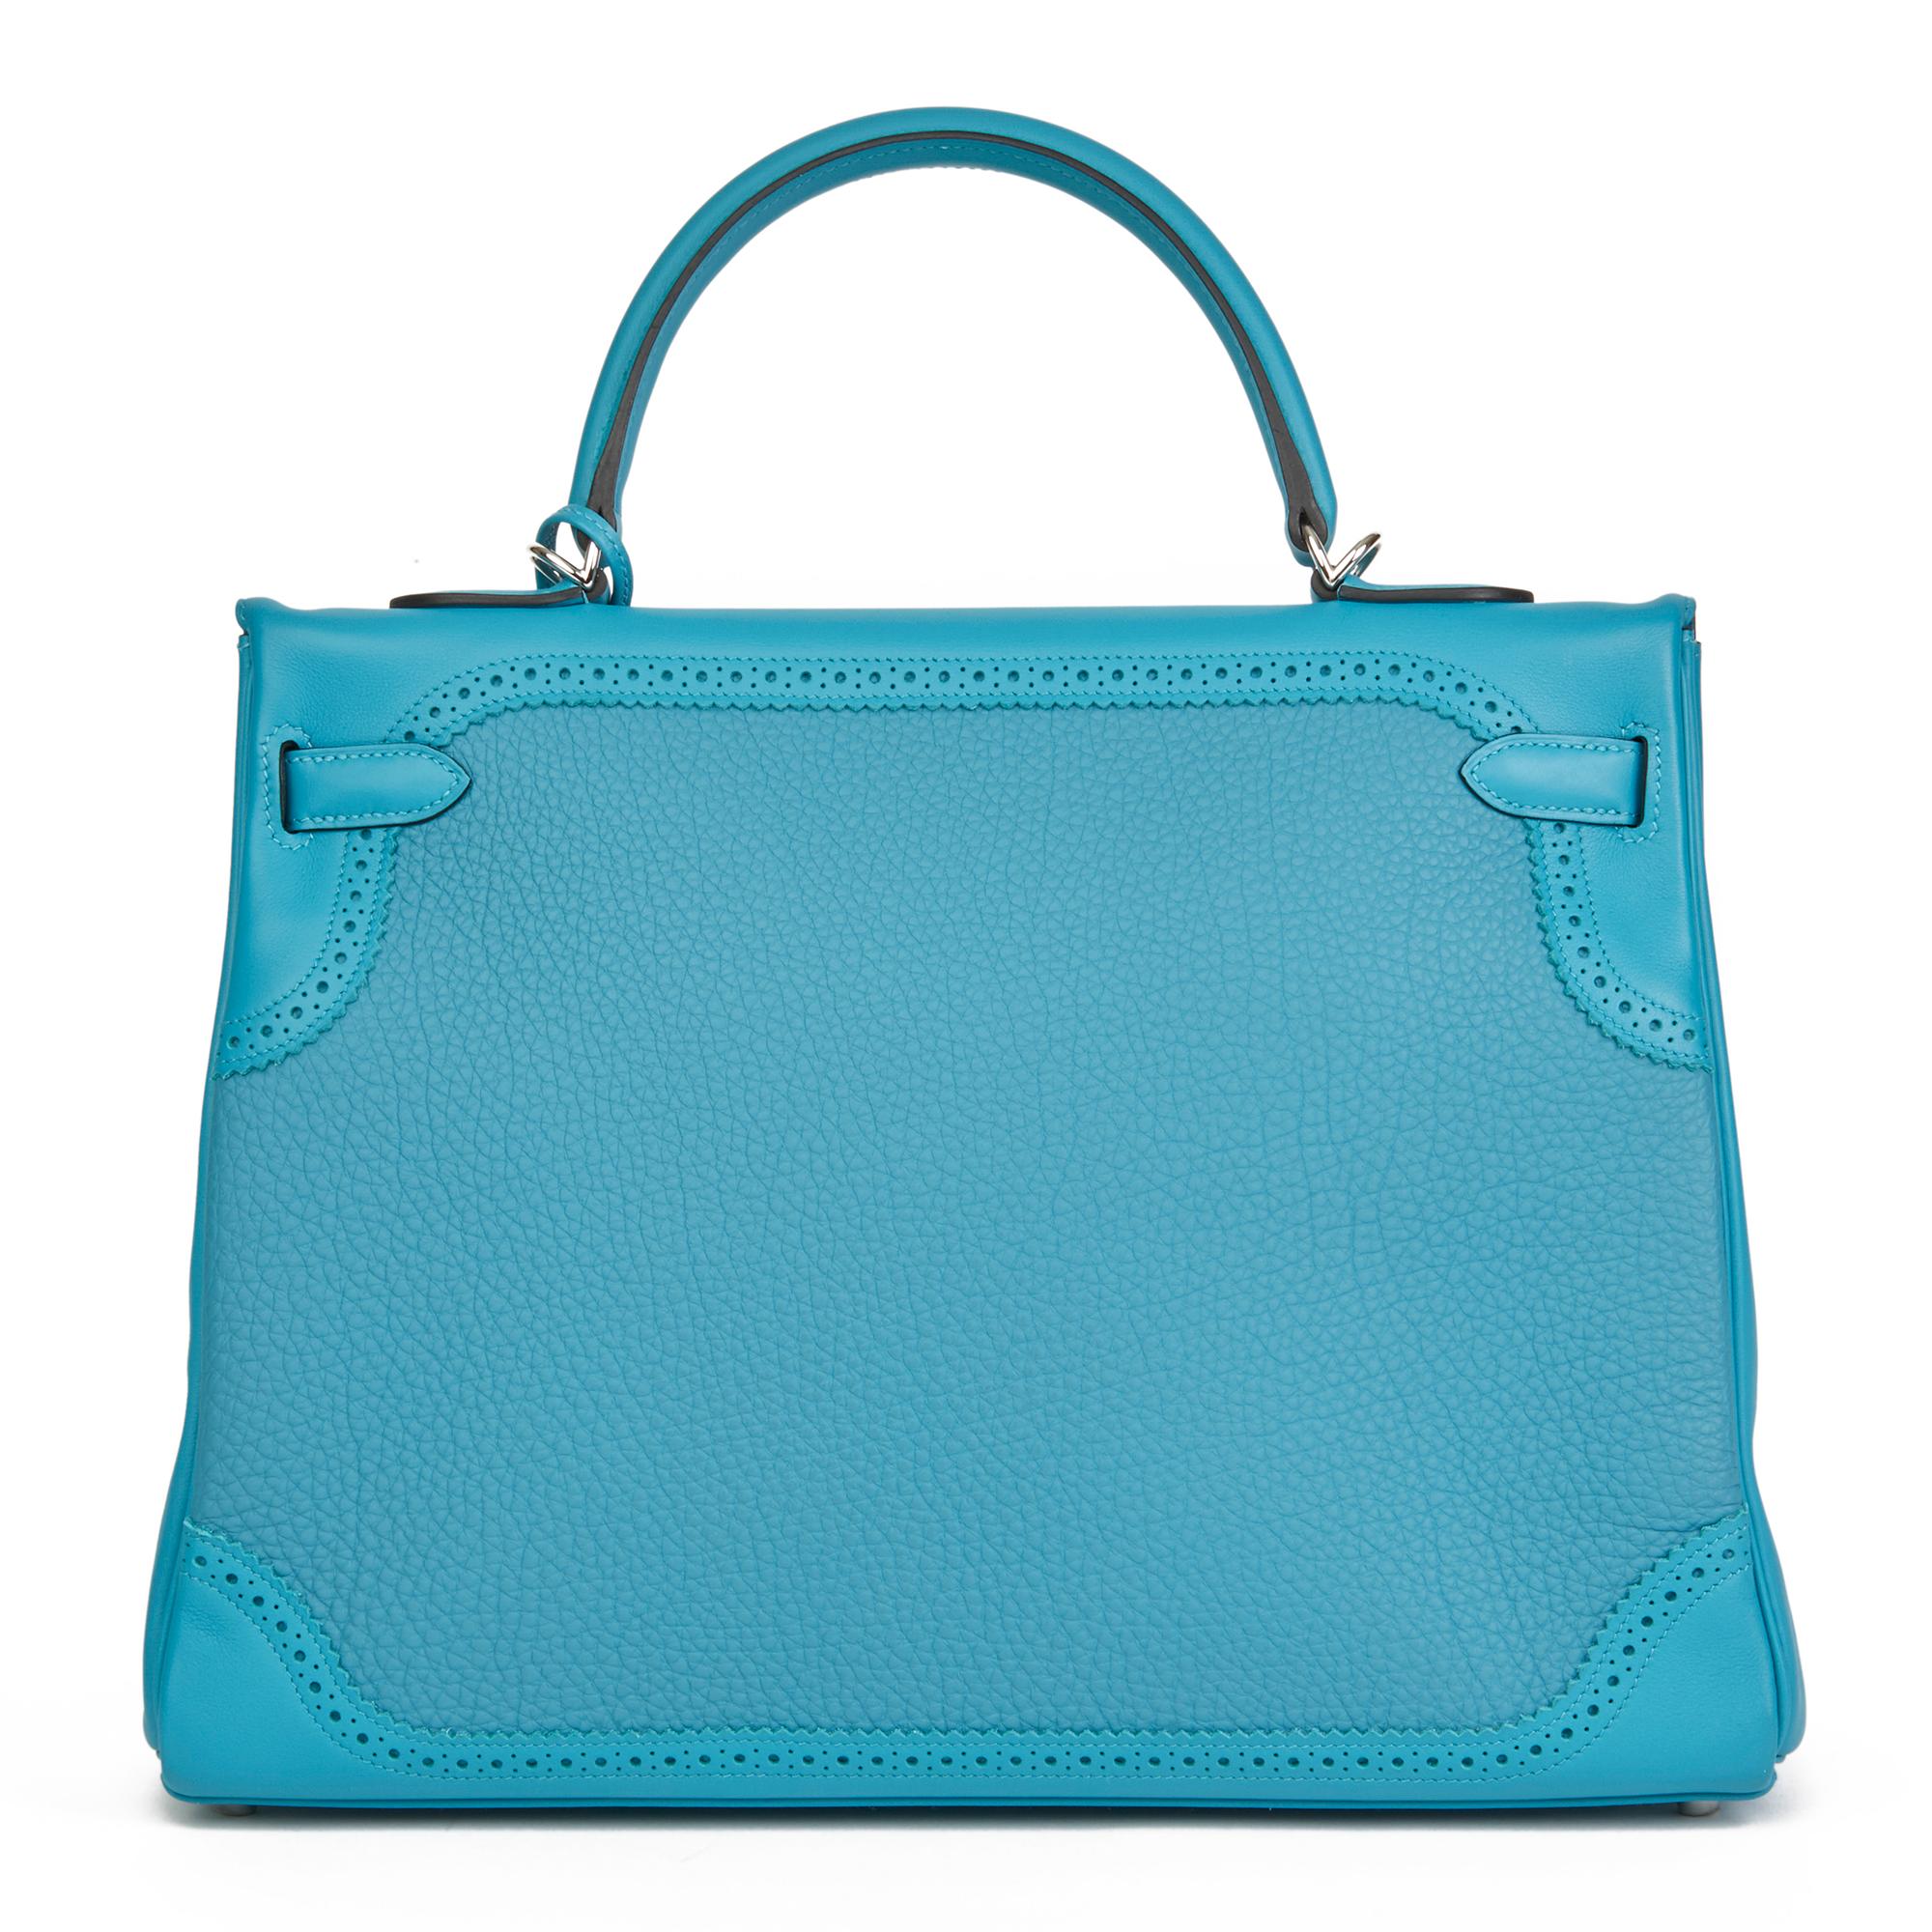 Blue 2014 Hermes Turquoise Togo & Swift Leather Ghillies Kelly 35cm Retourne